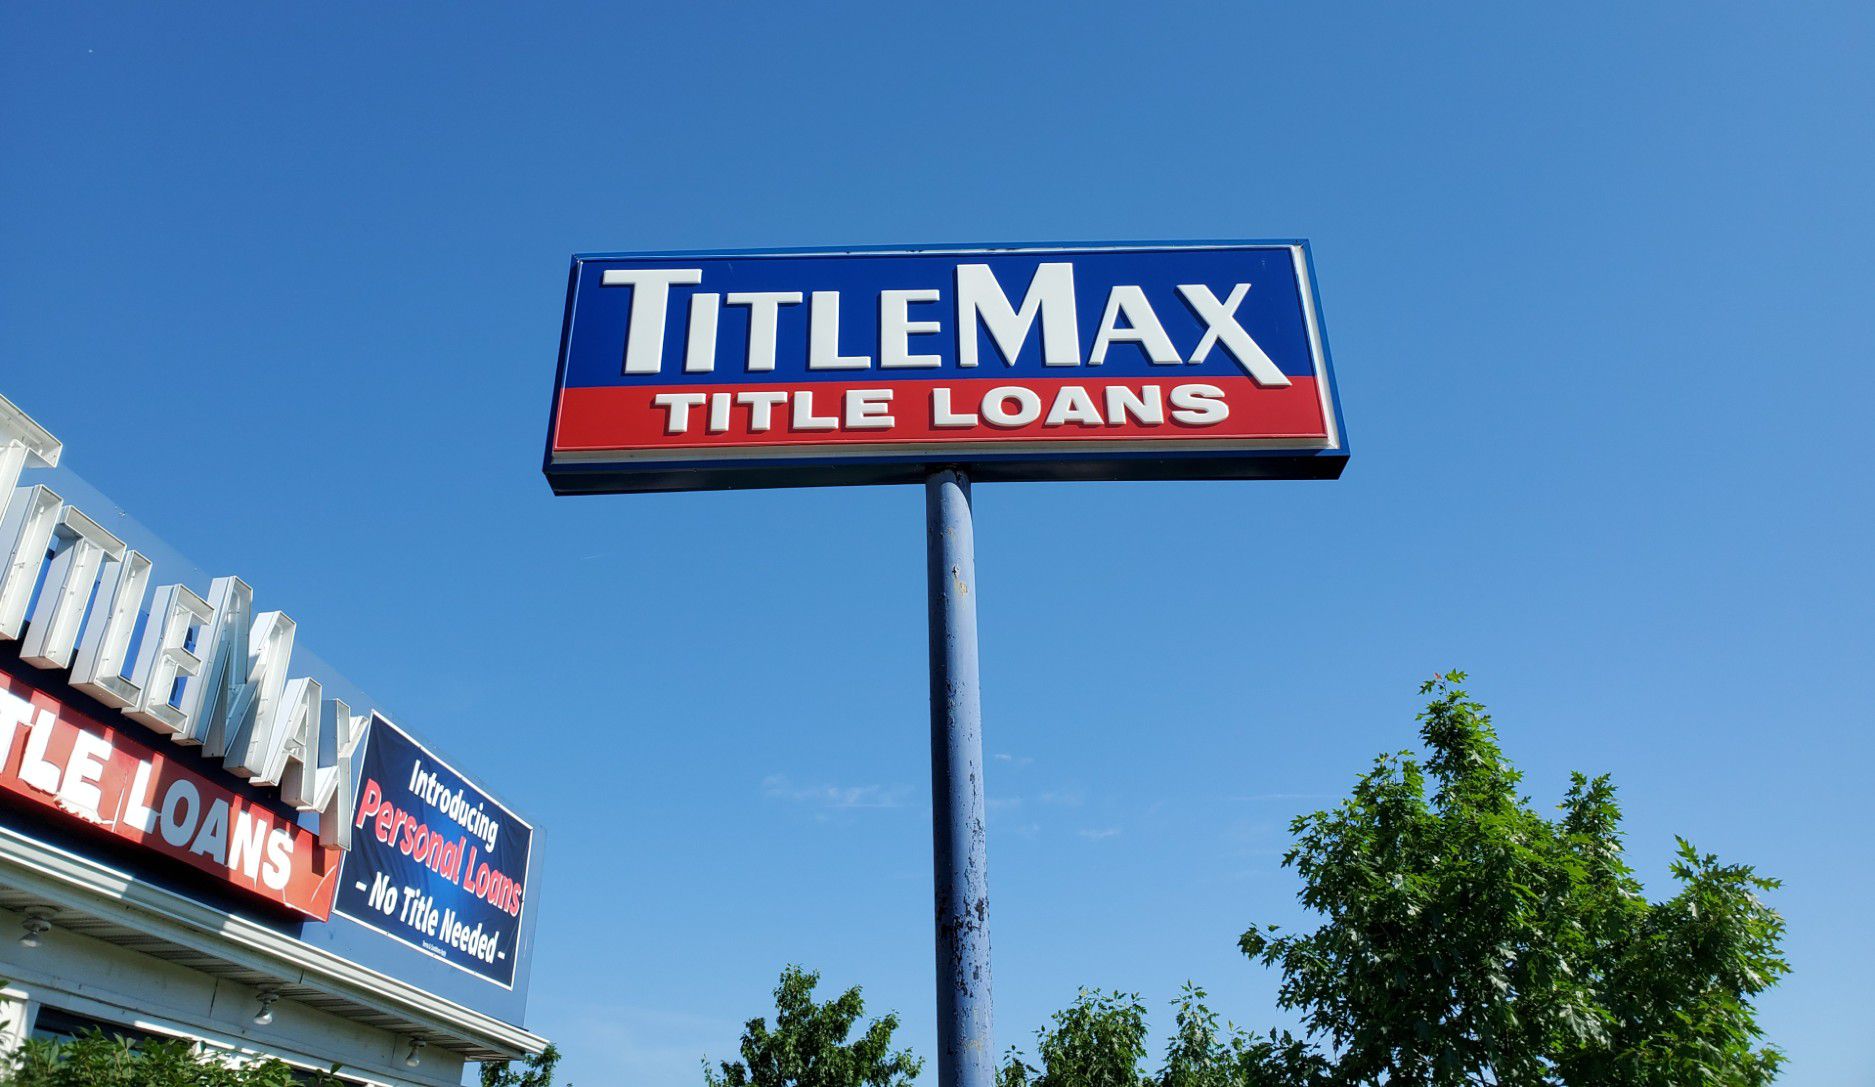 A sign for TitleMax which helps refinance title loans